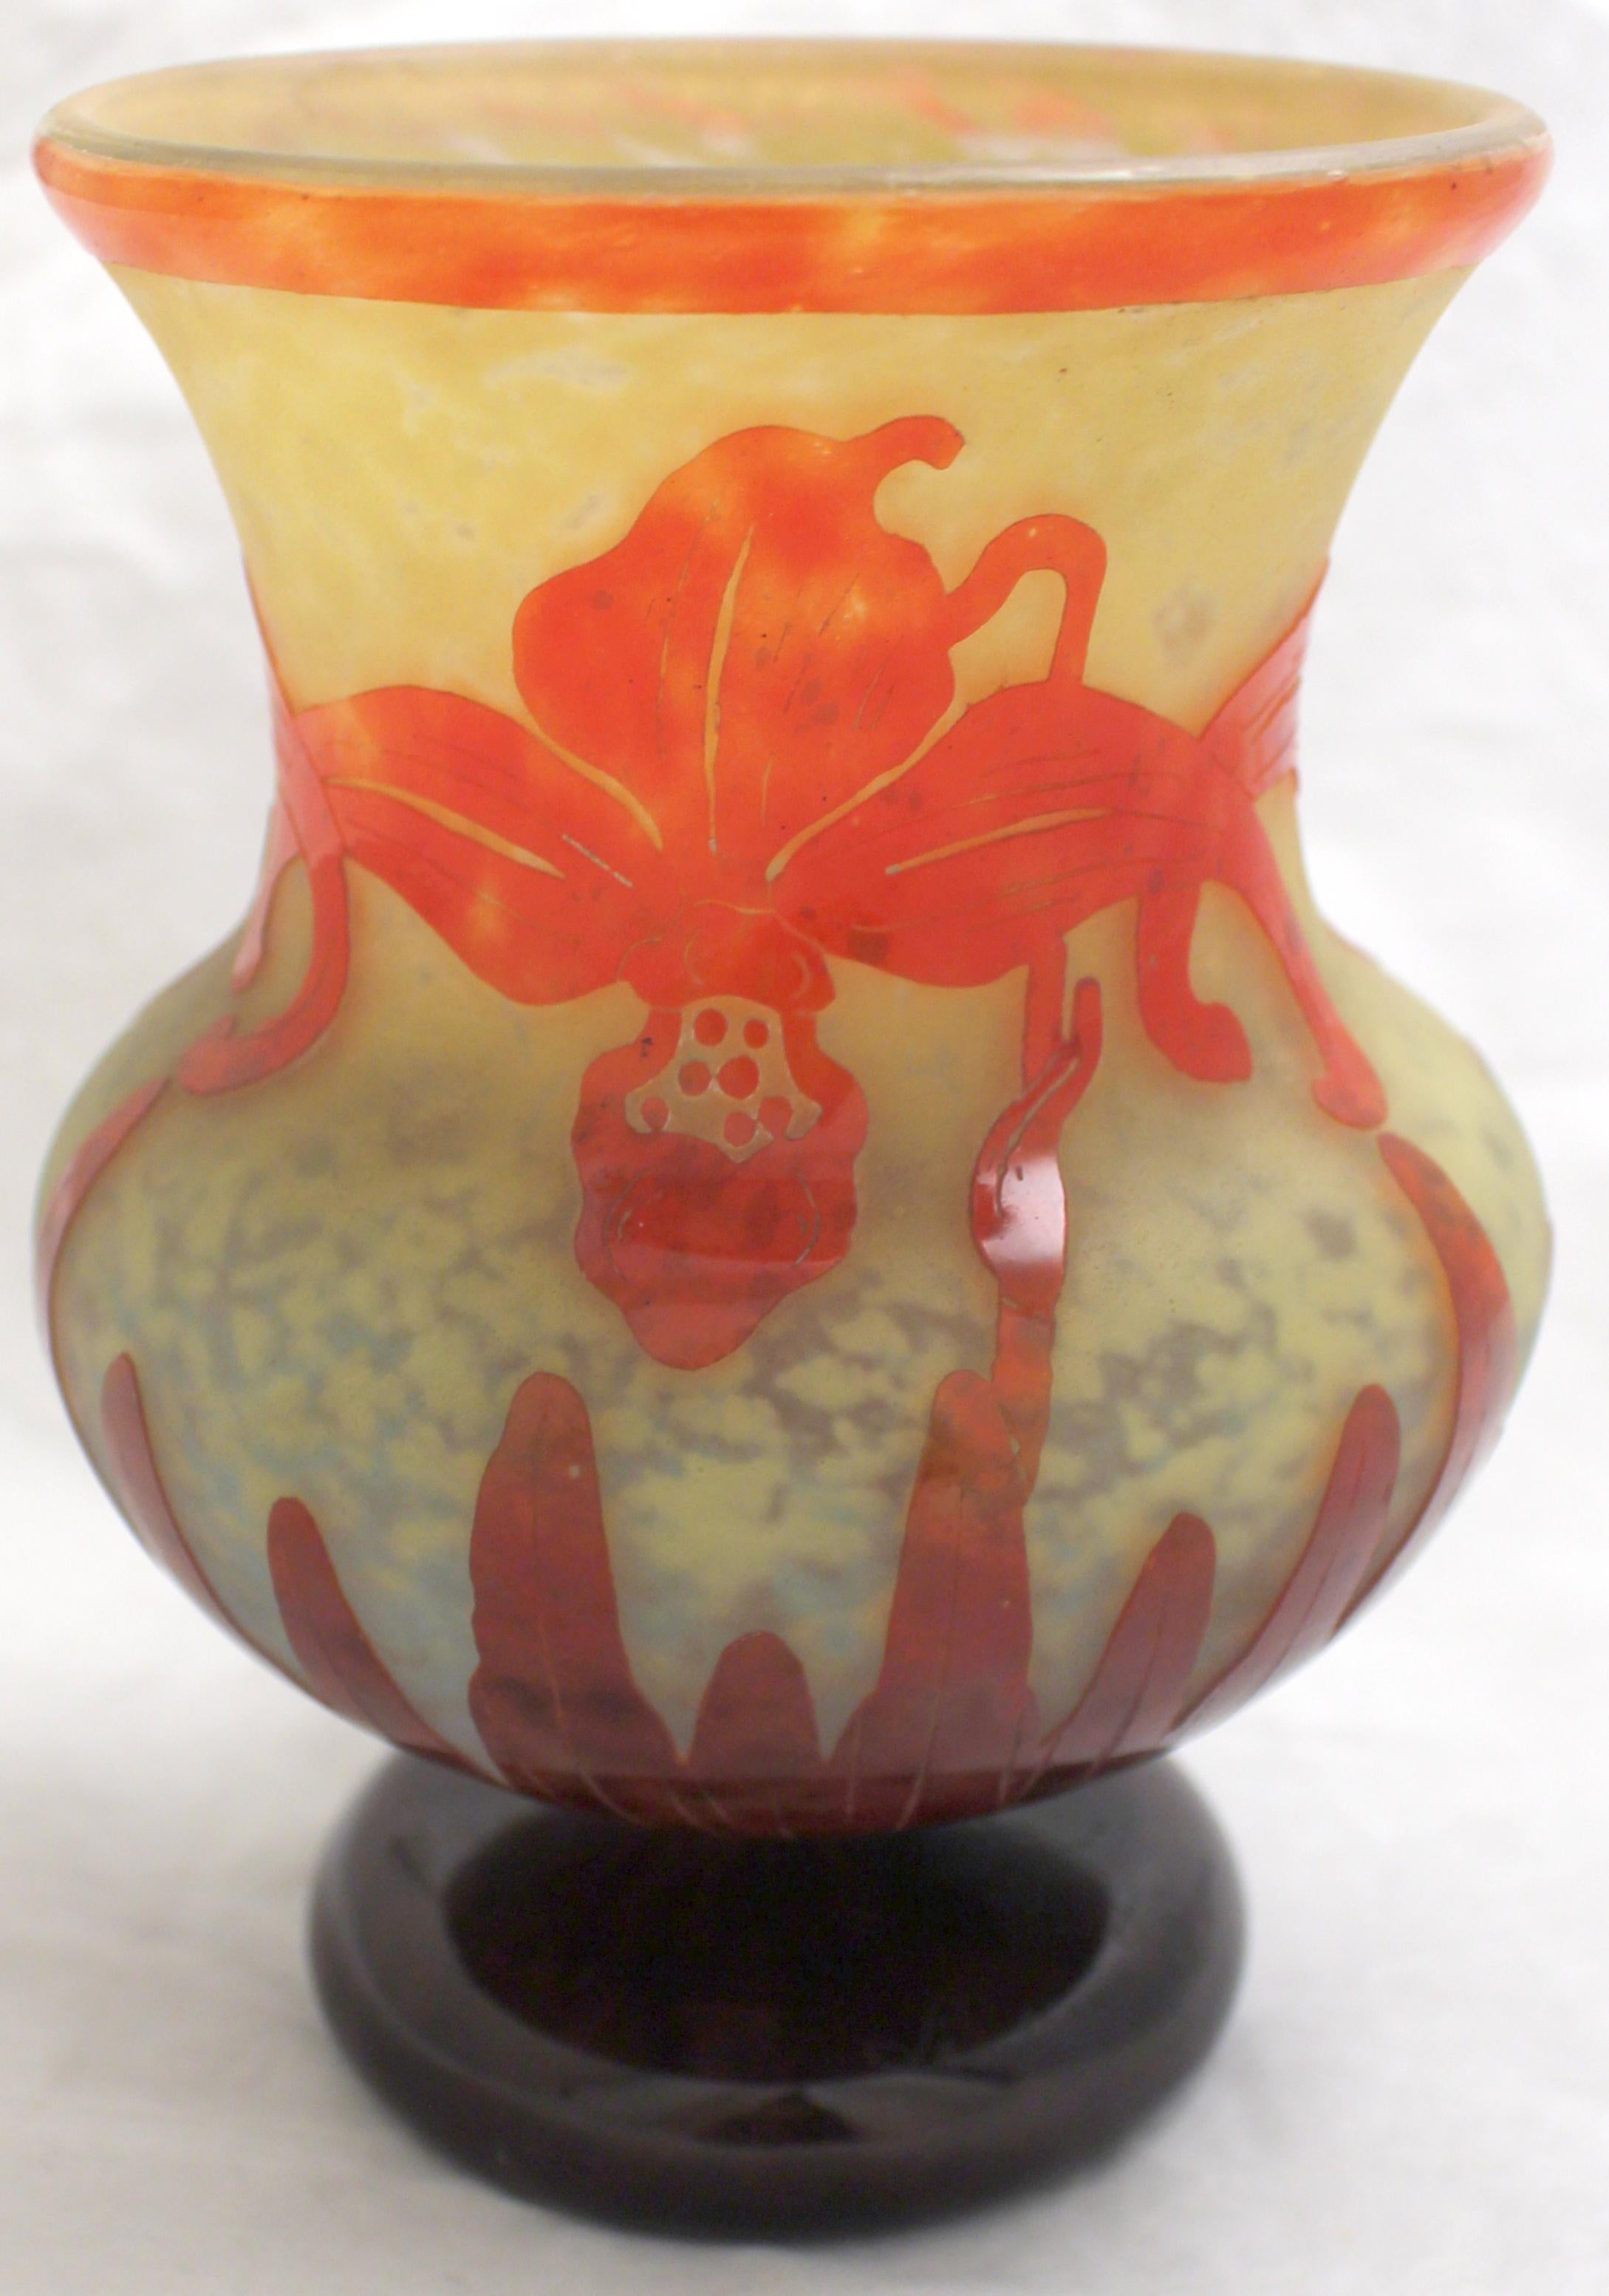 Vase Sign: Le Verre Francais 
acid worked
Le Verre cameo glass was a separate line of art glass designed by Charles Schneider. Its production was made at the same time as the Schneider designed glasses 1918 –1933. But from 1919 the two lines were